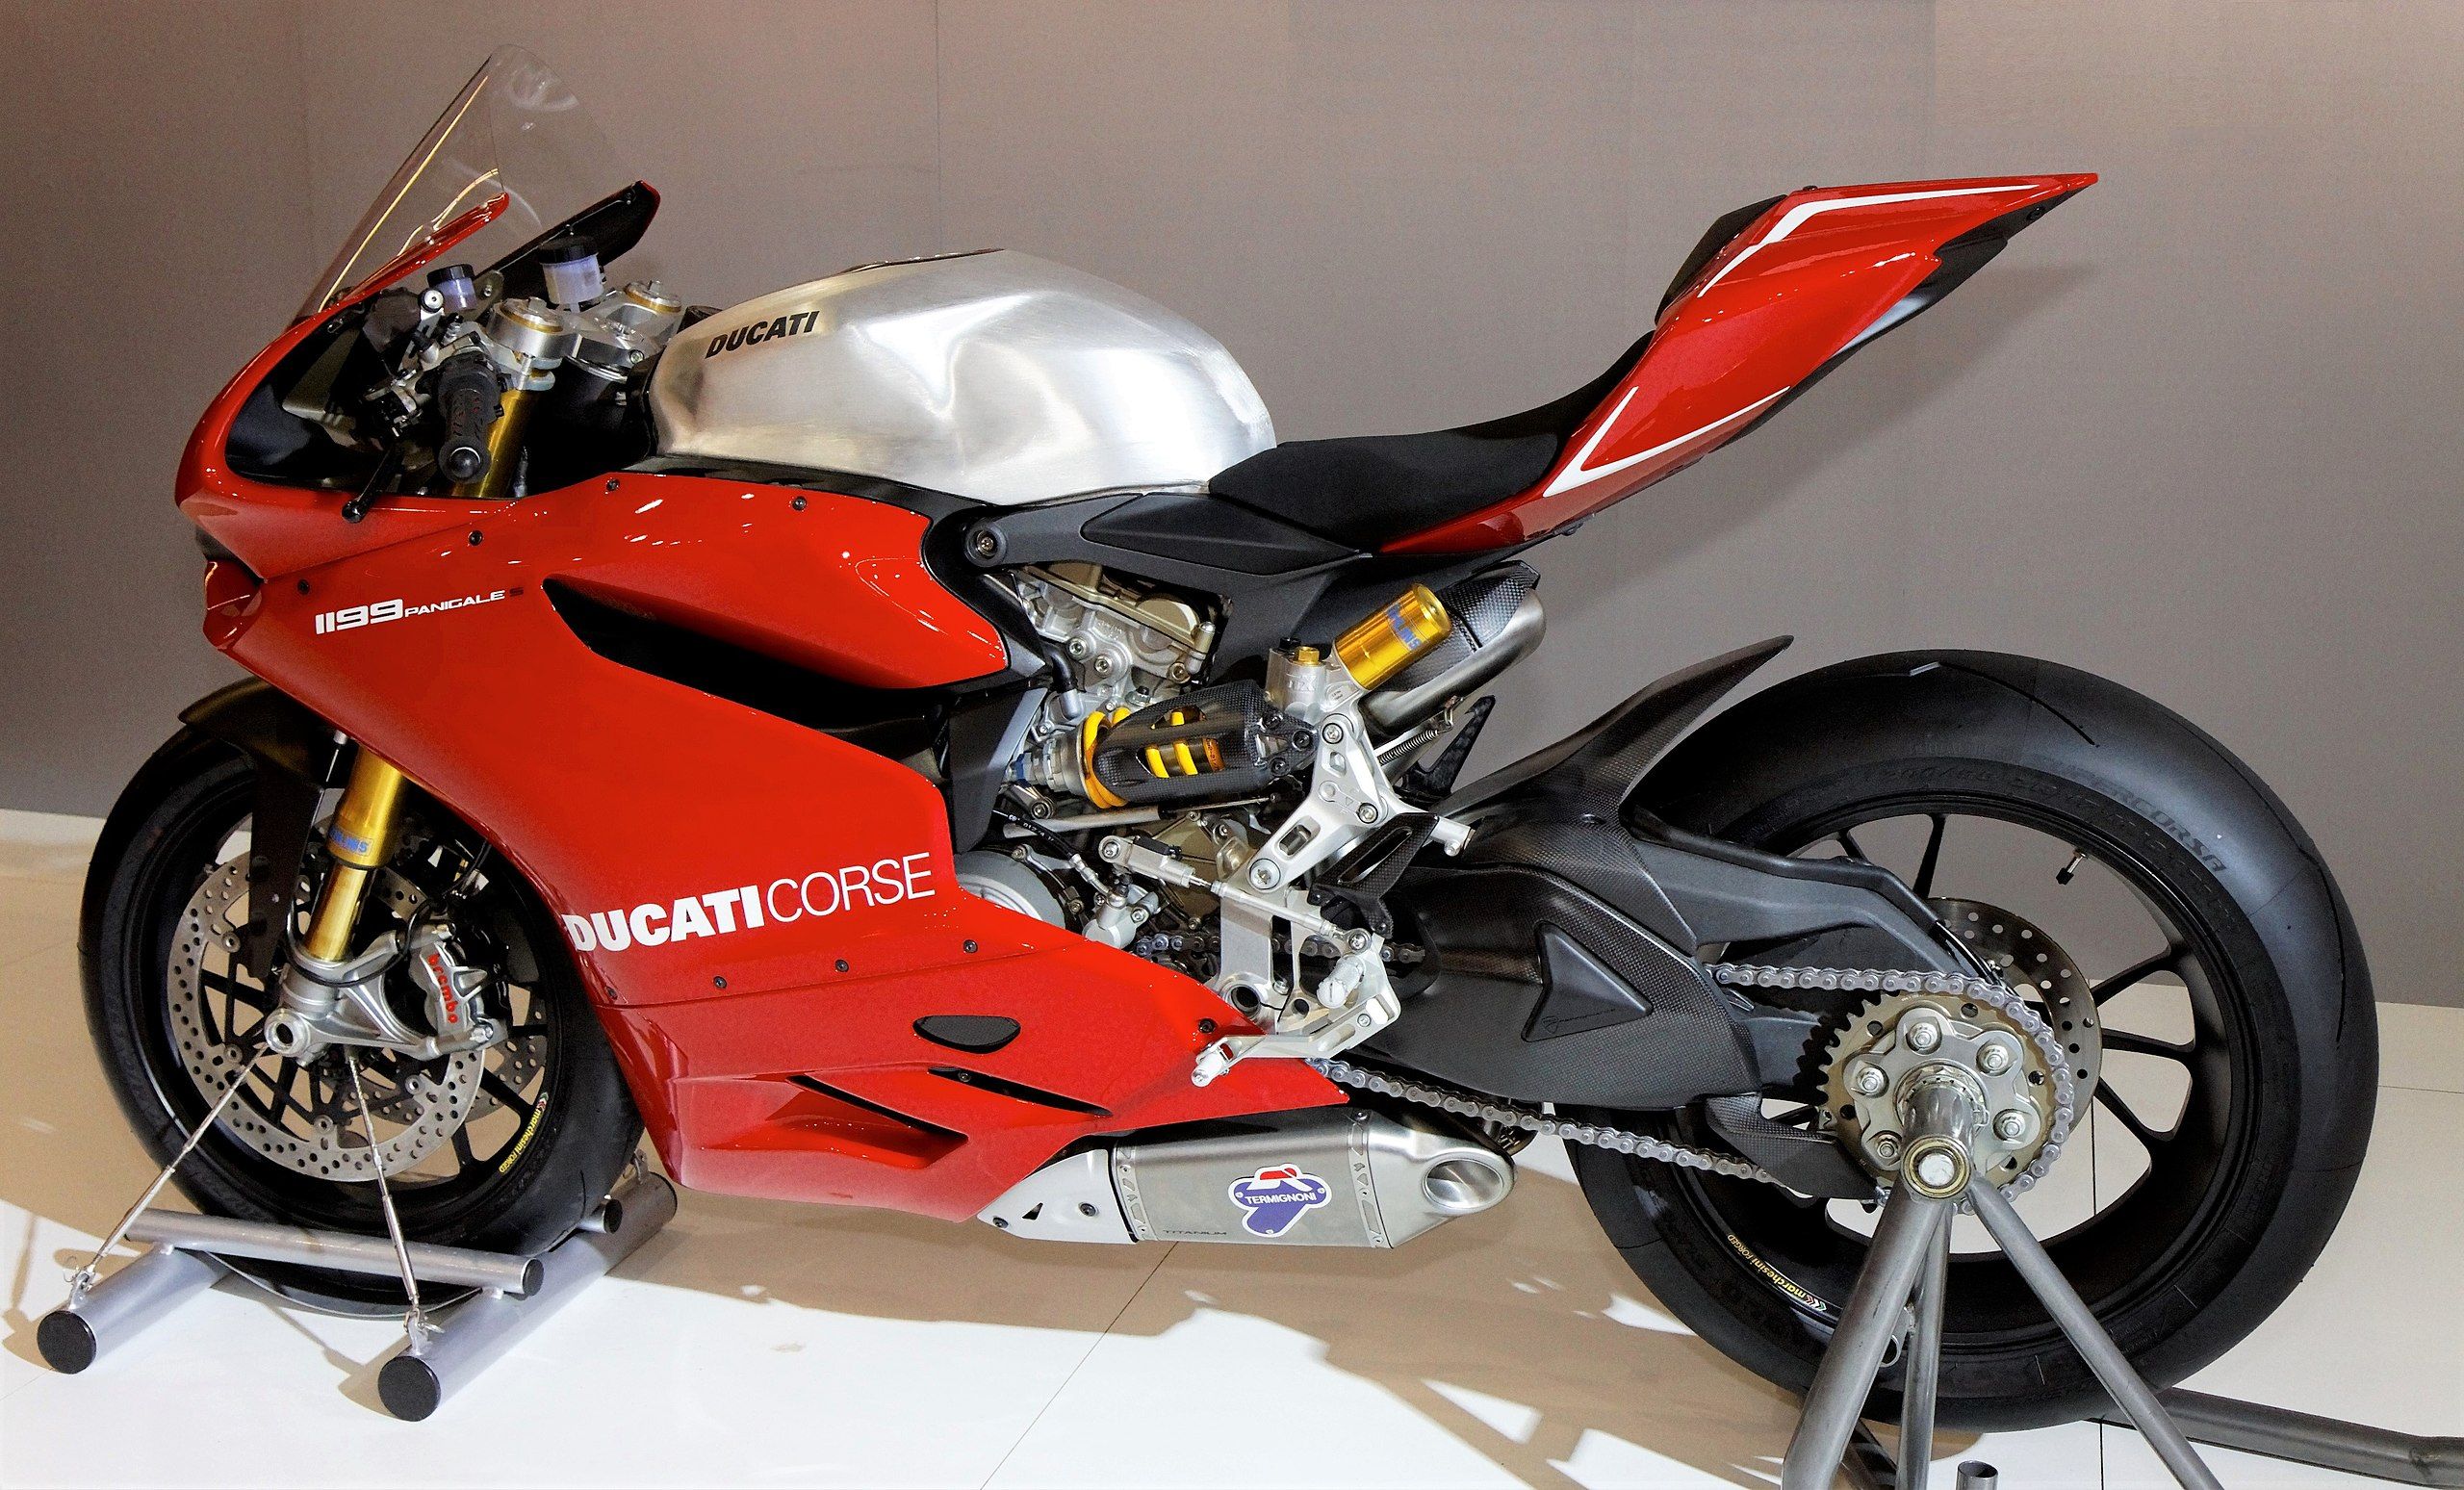 5 Things We Love About The Ducati Panigale (5 Reasons Why We'd Never ...